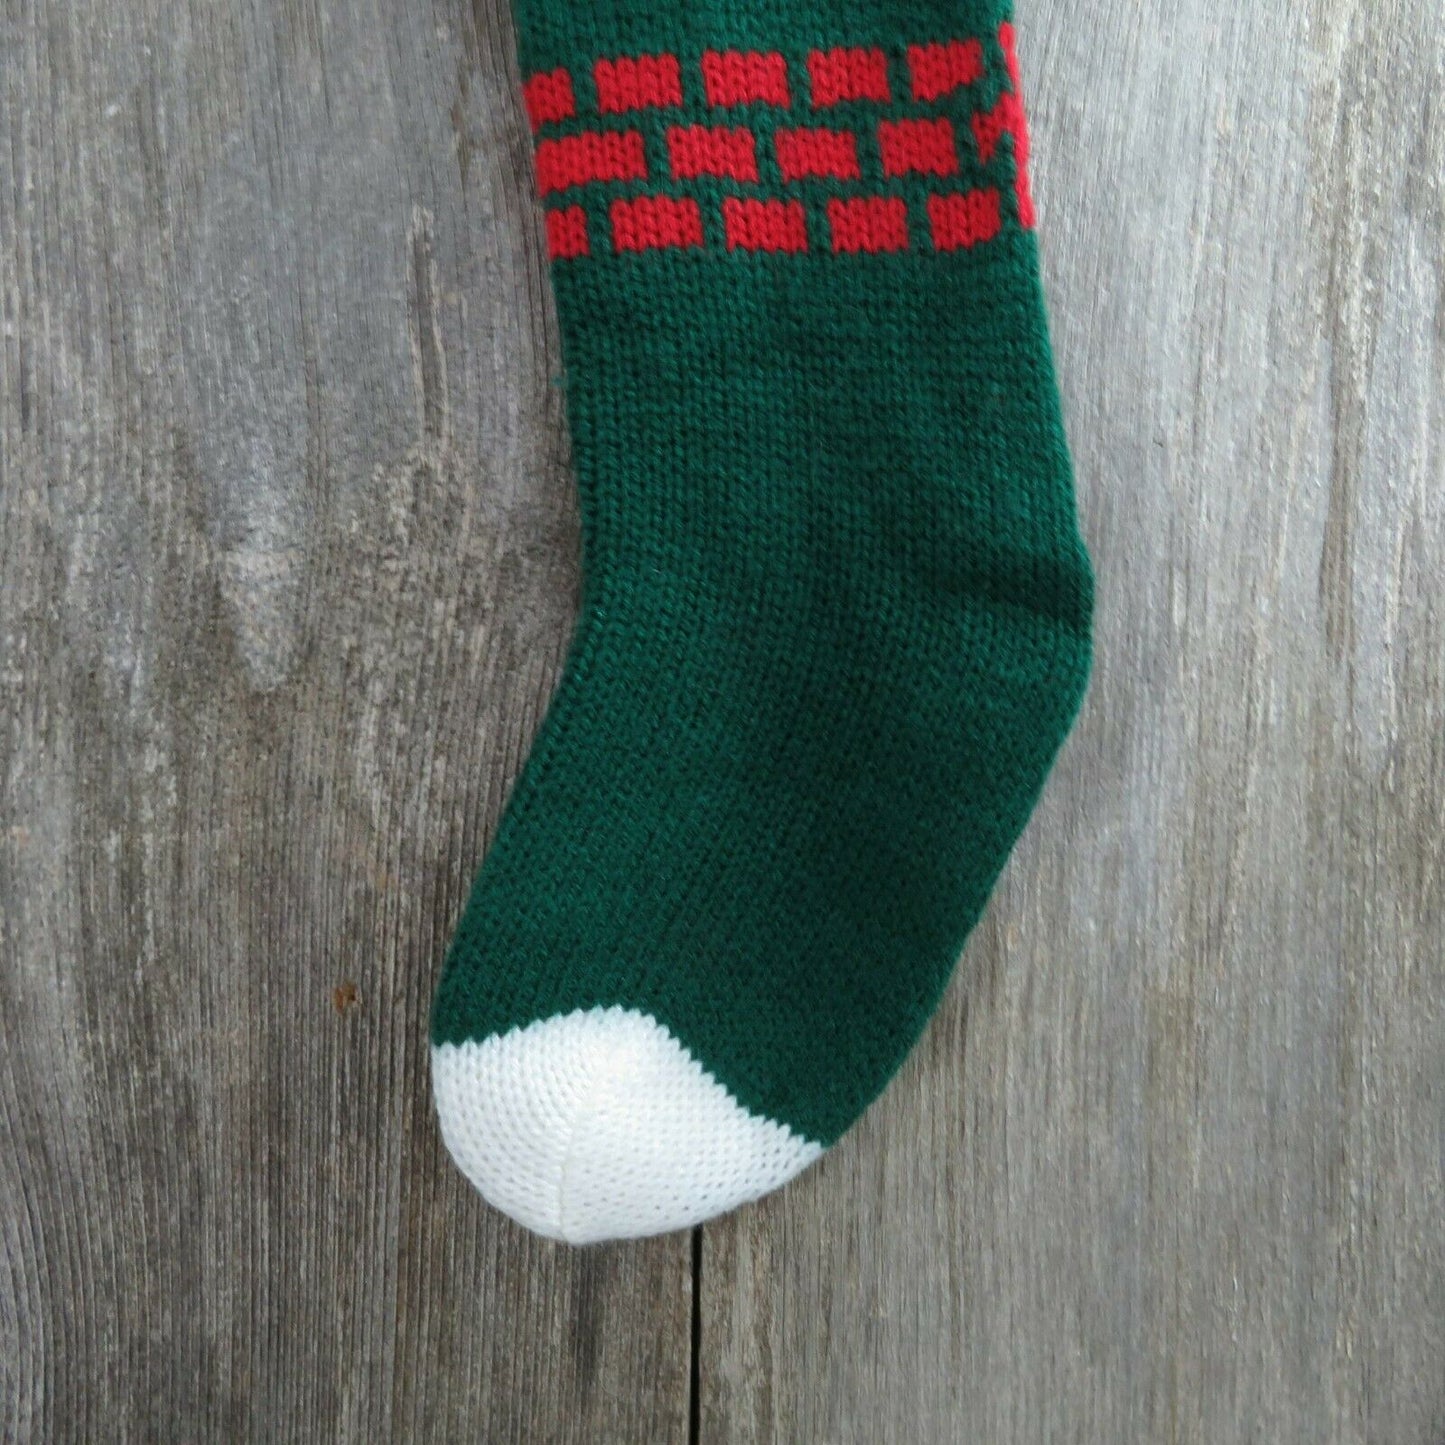 Vintage Santa Claus Stocking Knitted Knit Green Red White Christmas Pom Pom - At Grandma's Table